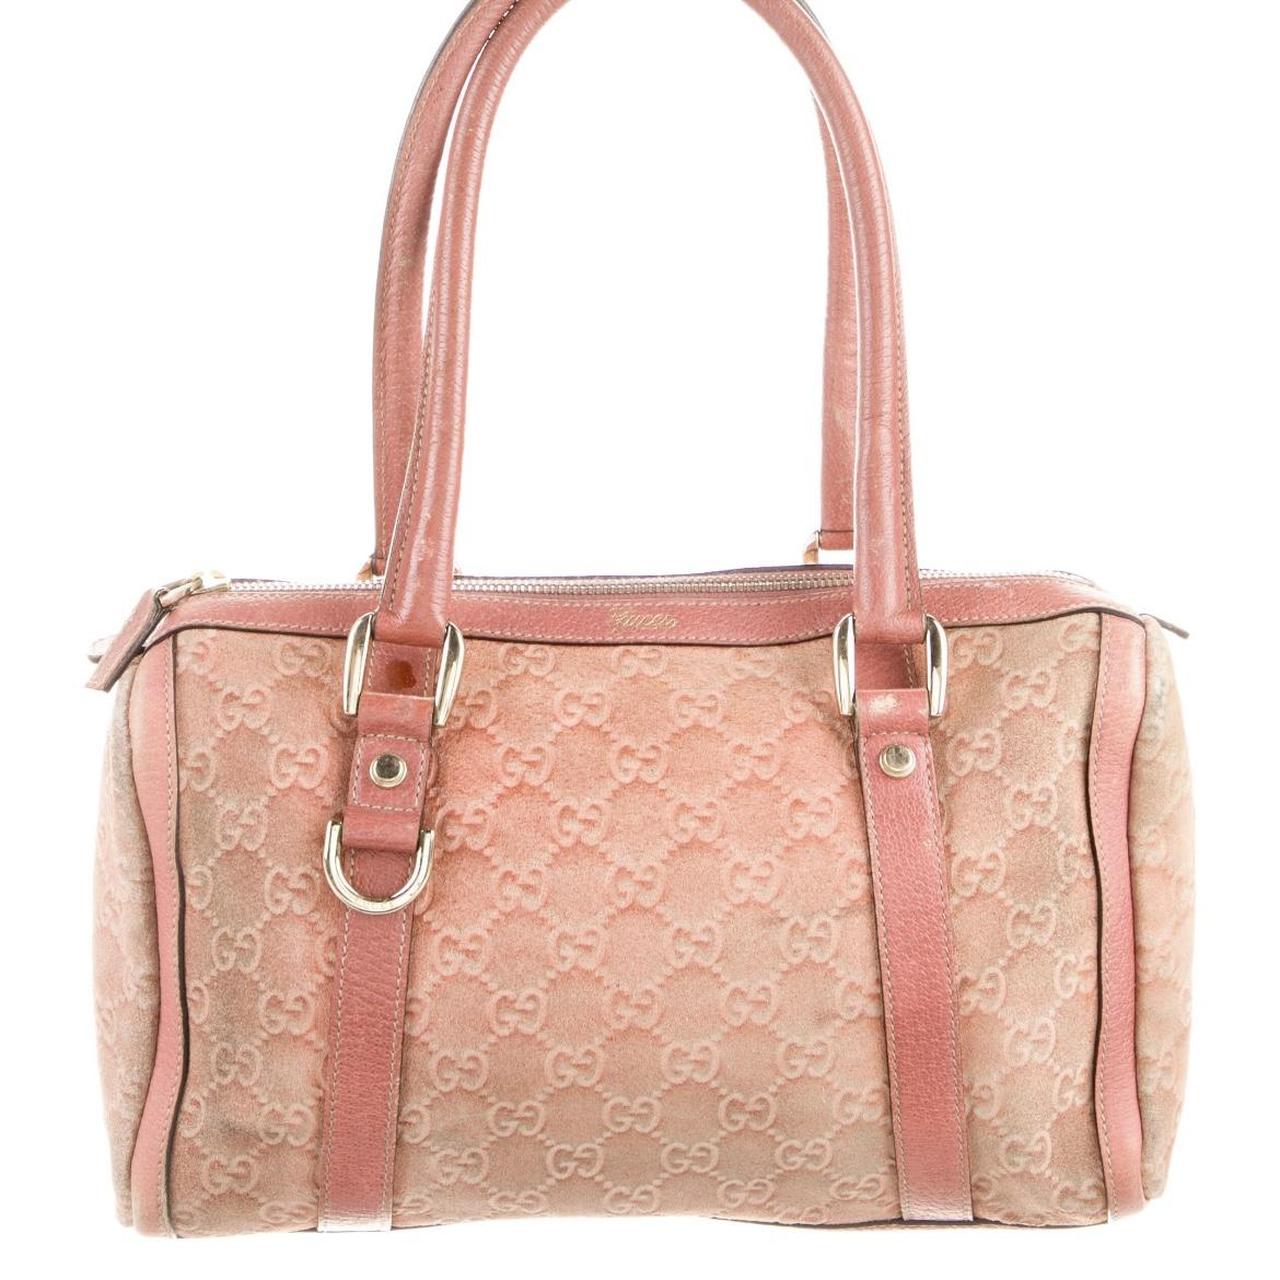 Baby Pink tote bag, it's just like the LV on the go - Depop